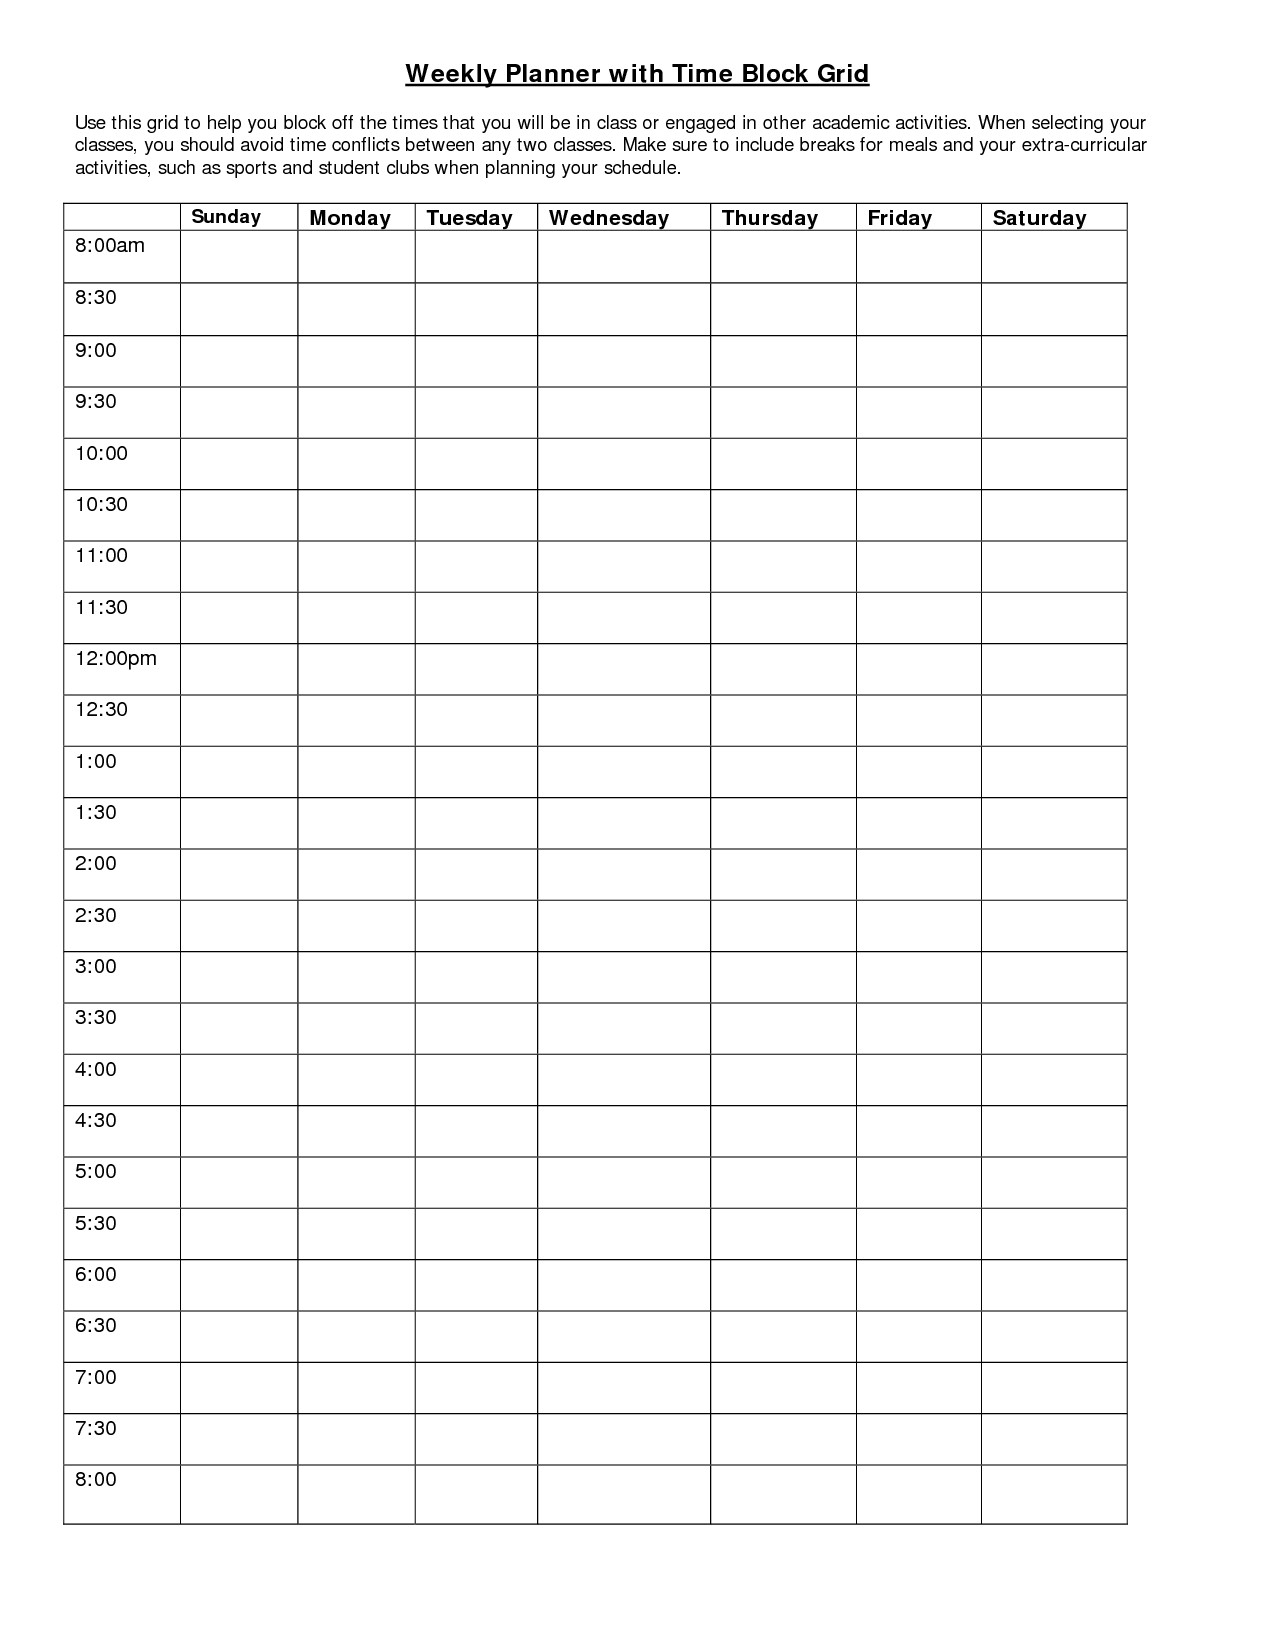 Weekly Planner With Time Slots Printable :-Free Calendar  Printable Weekly Calendar With Time Slots